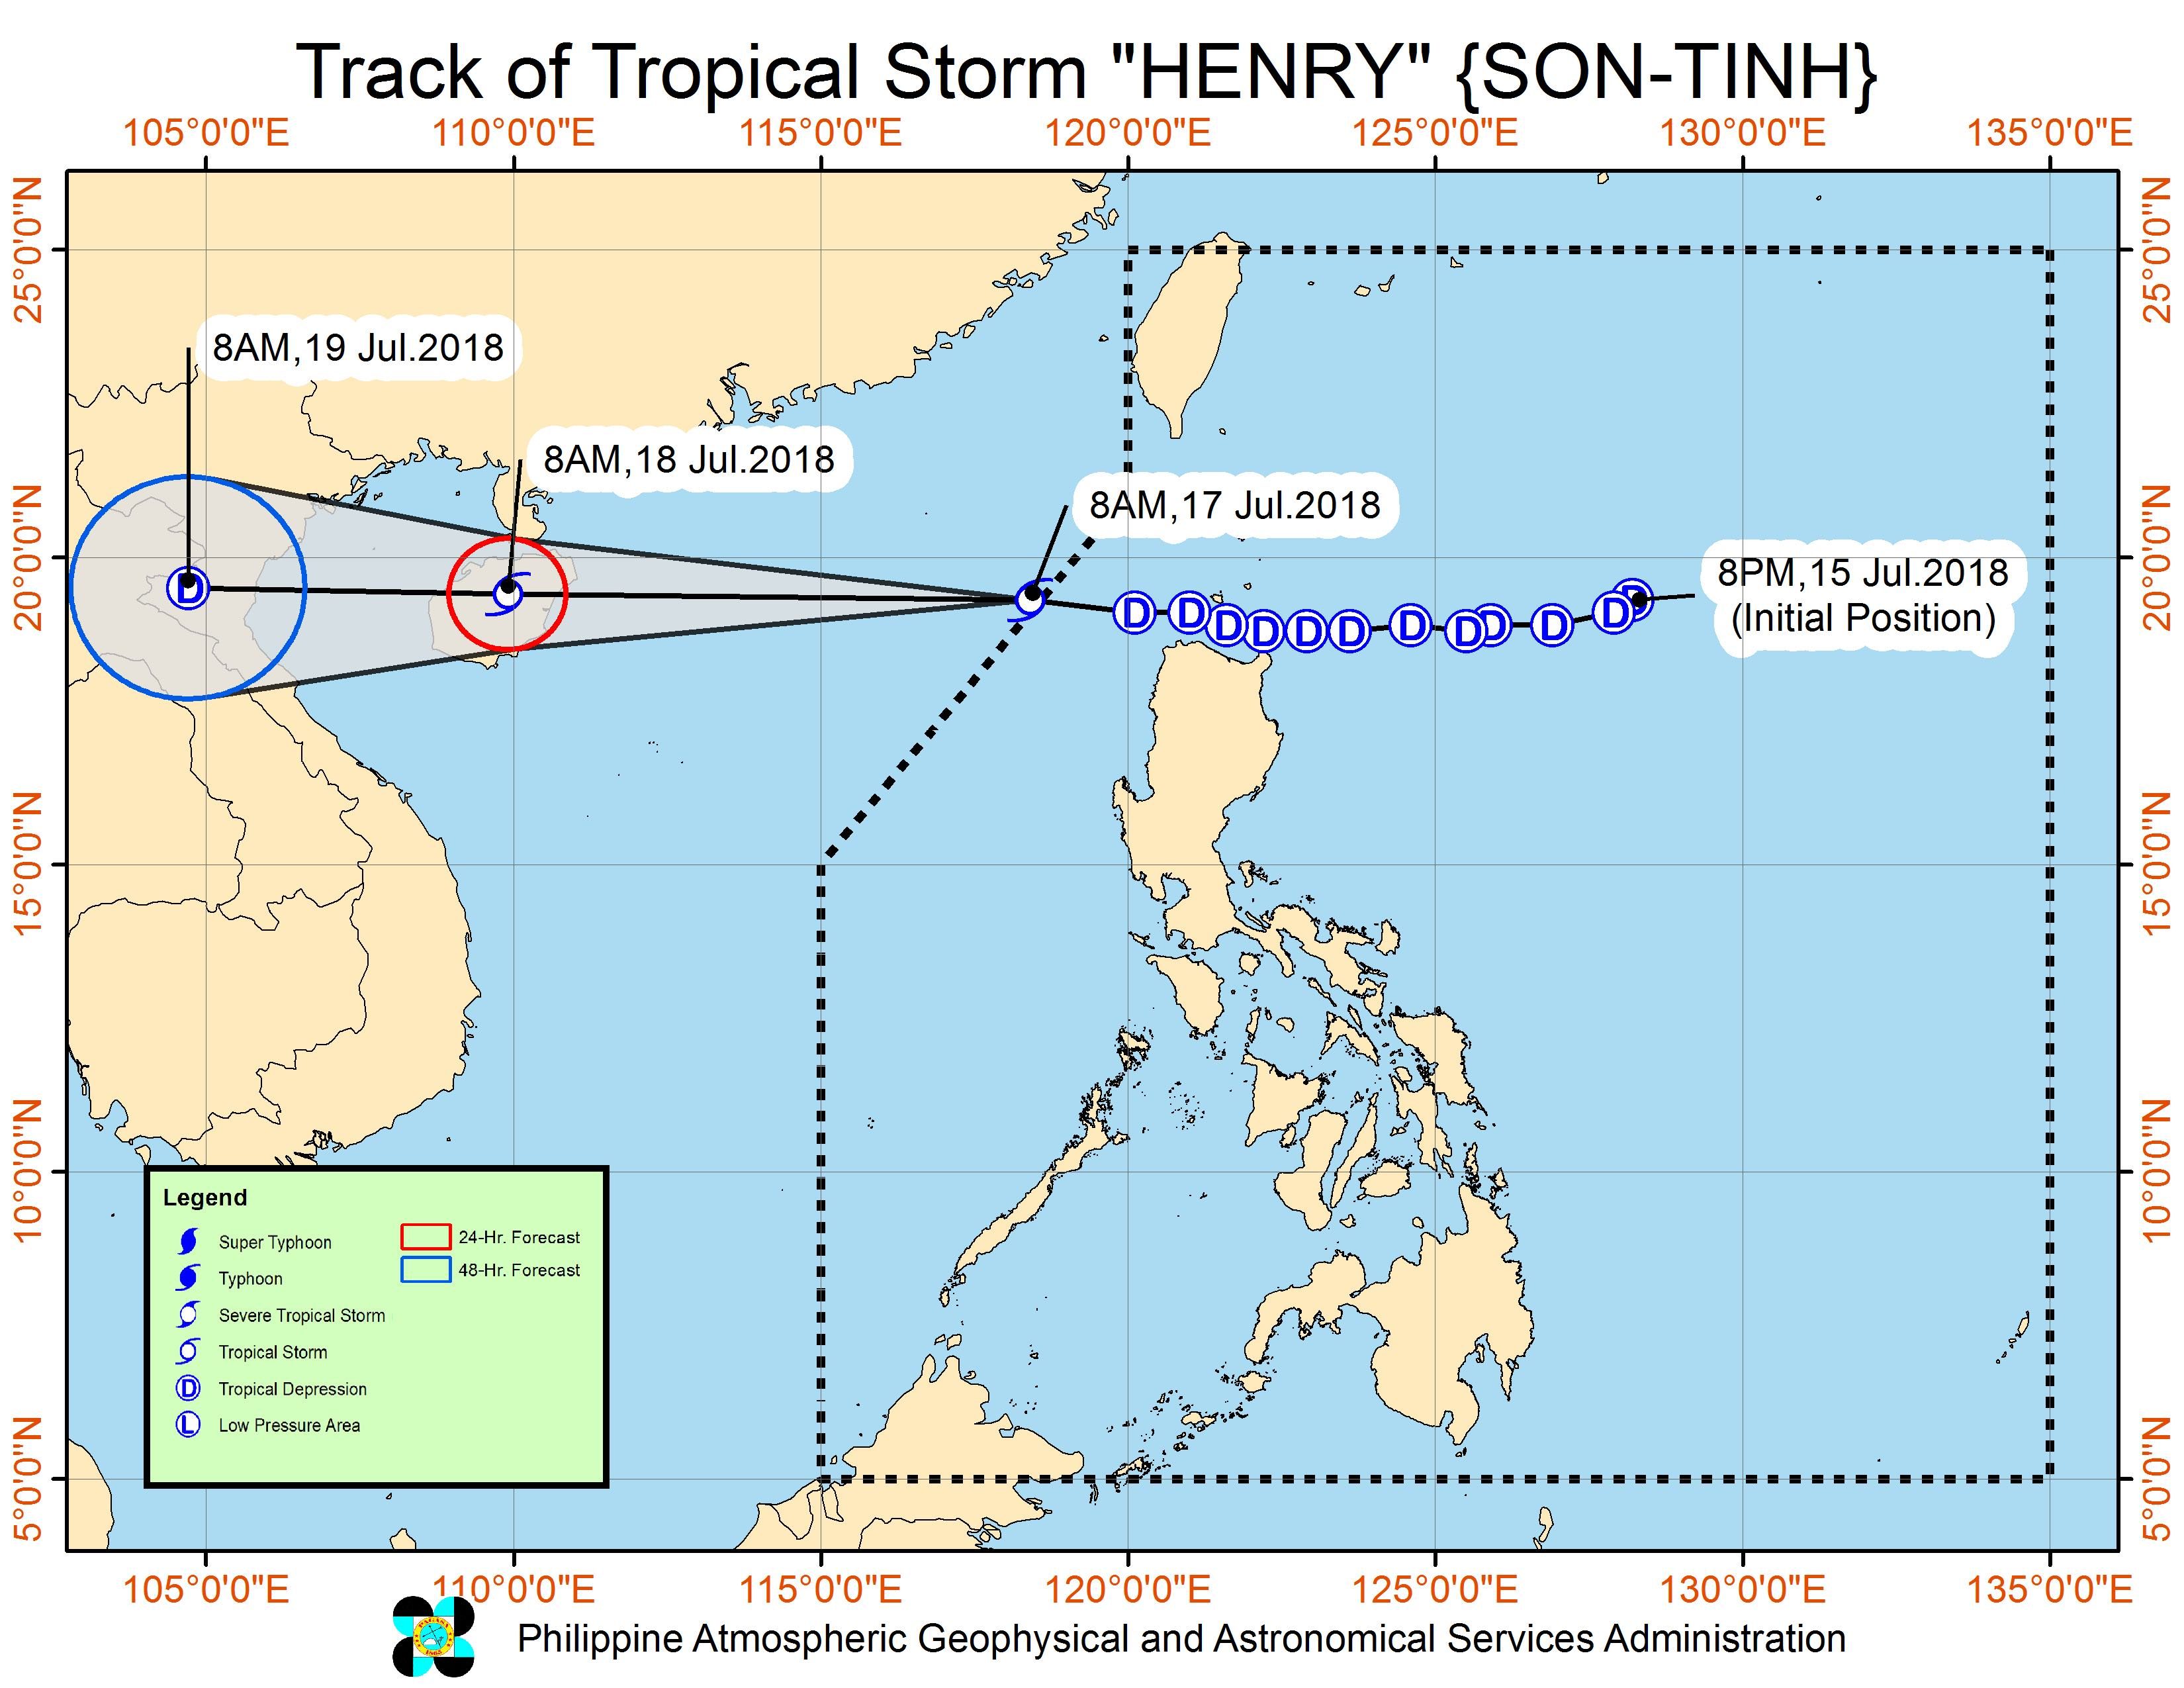 Forecast track of Tropical Storm Henry (Son-Tinh) as of July 17, 2018, 11 am. Image courtesy of PAGASA 